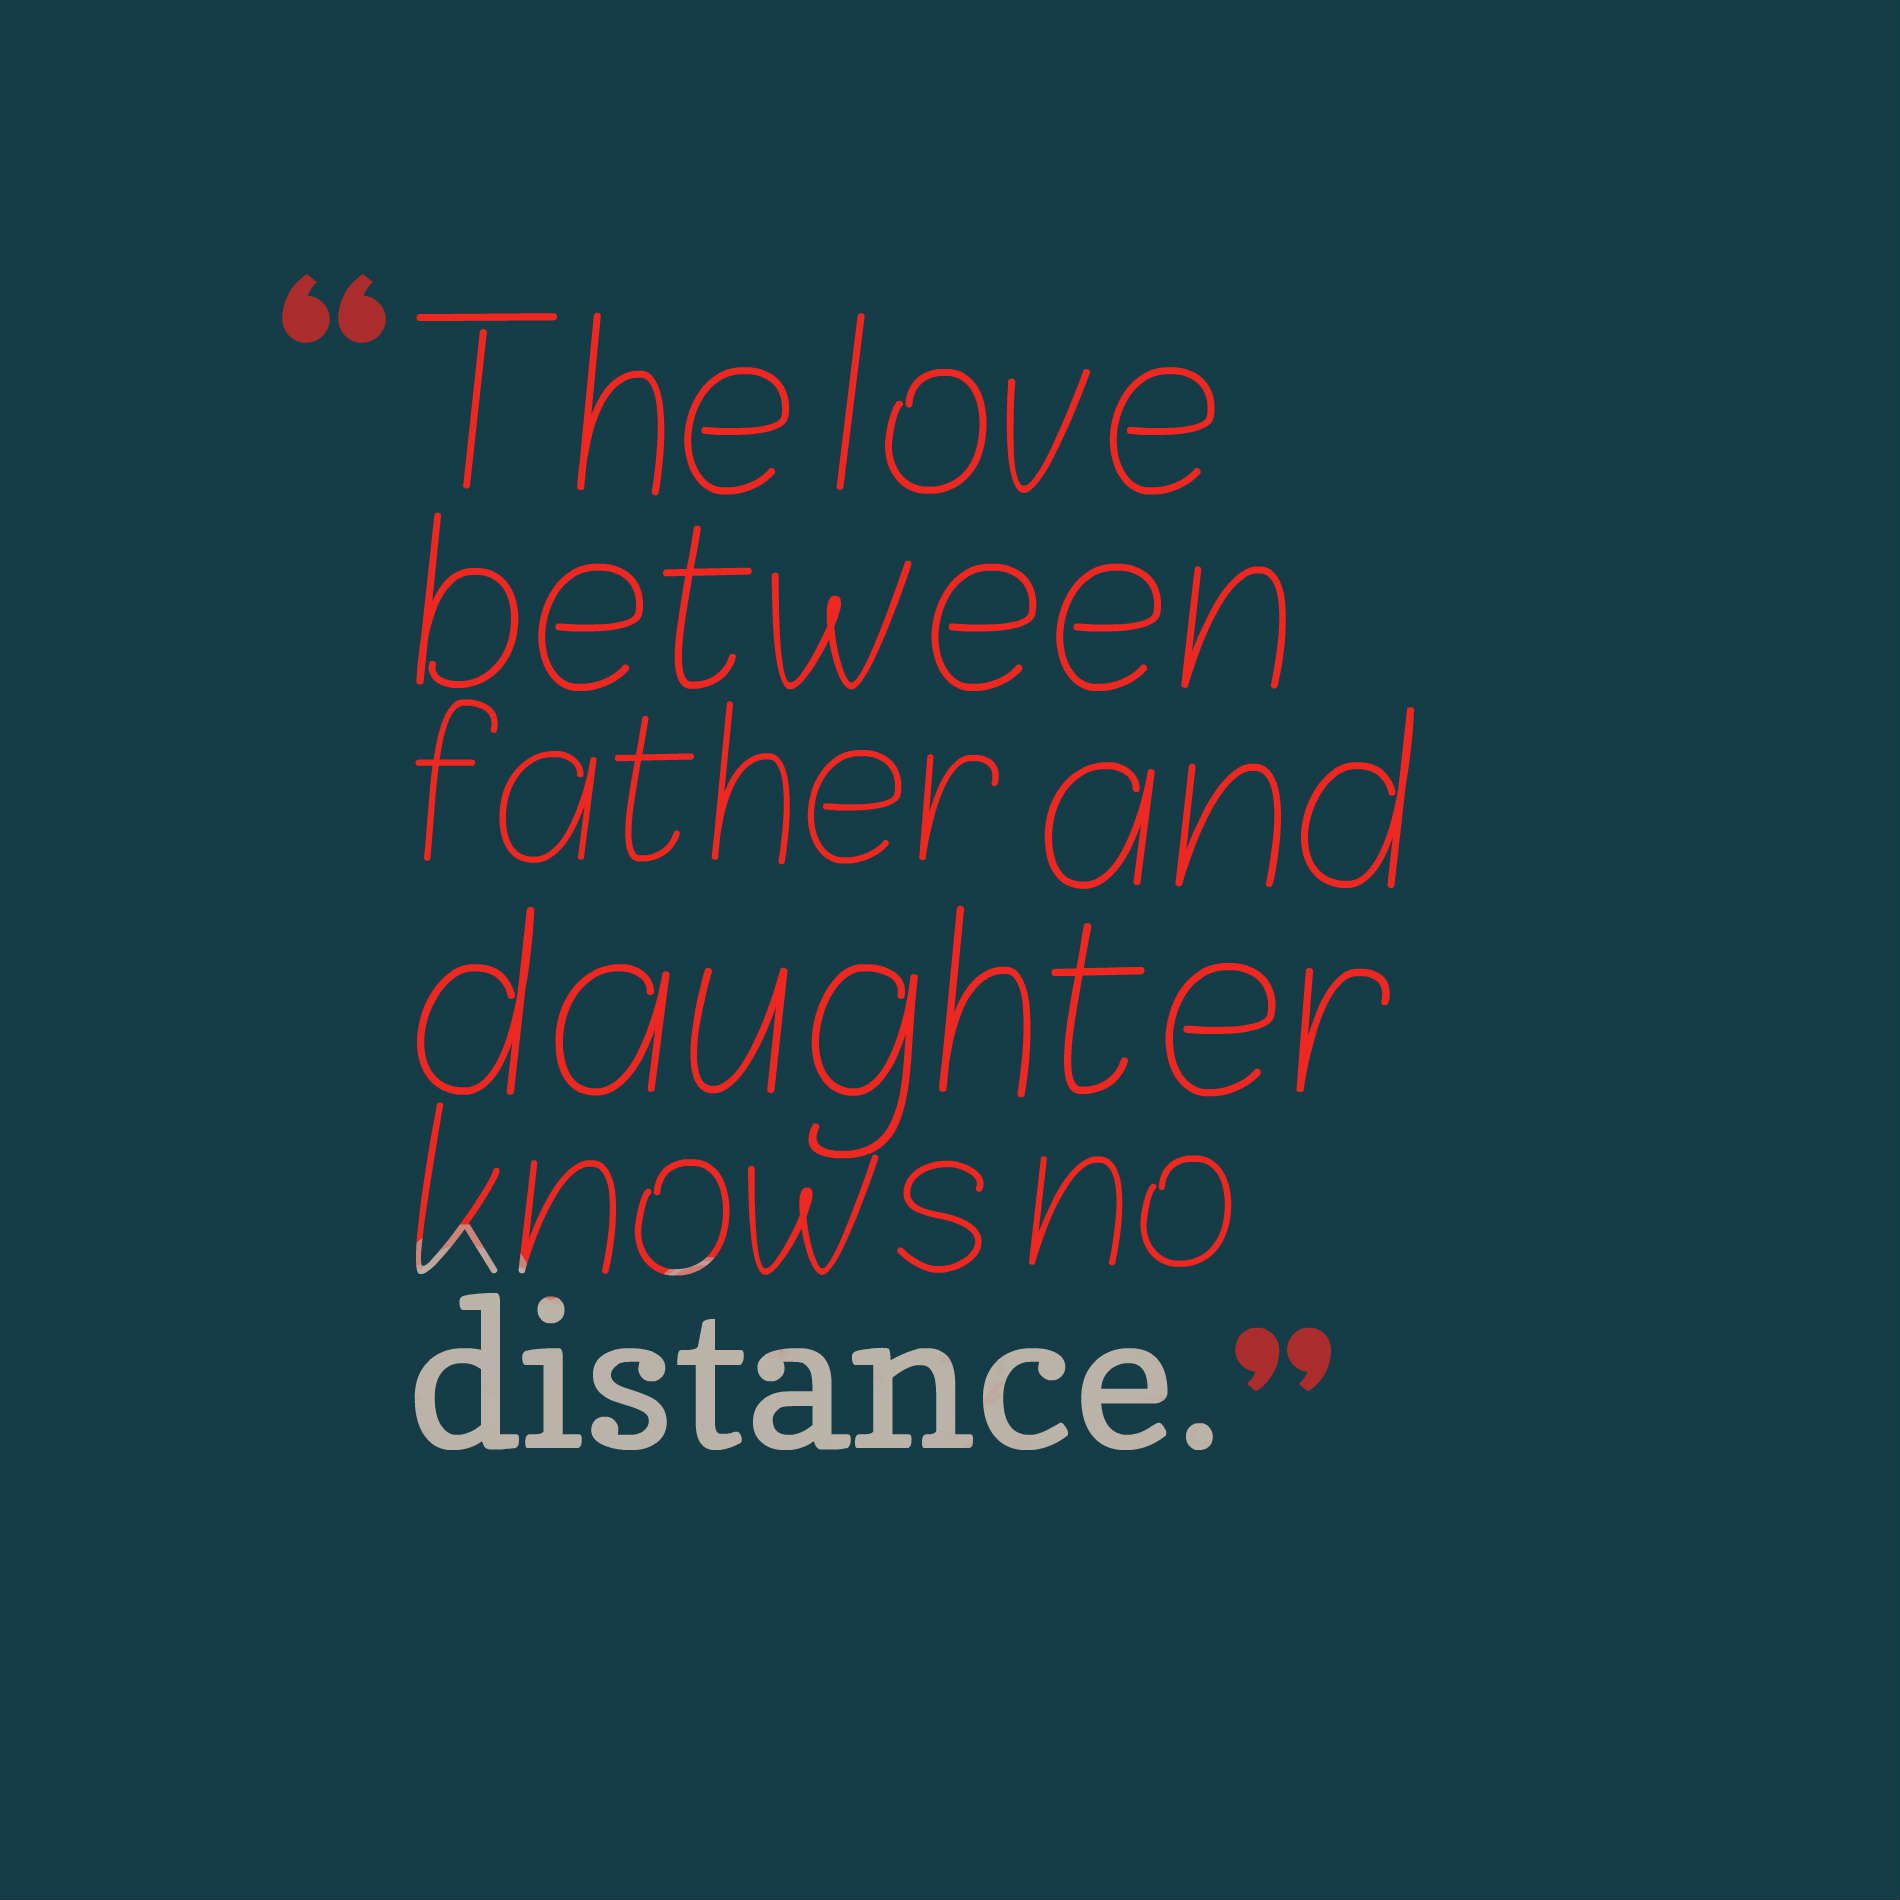 The love between father and daughter knows no distance.